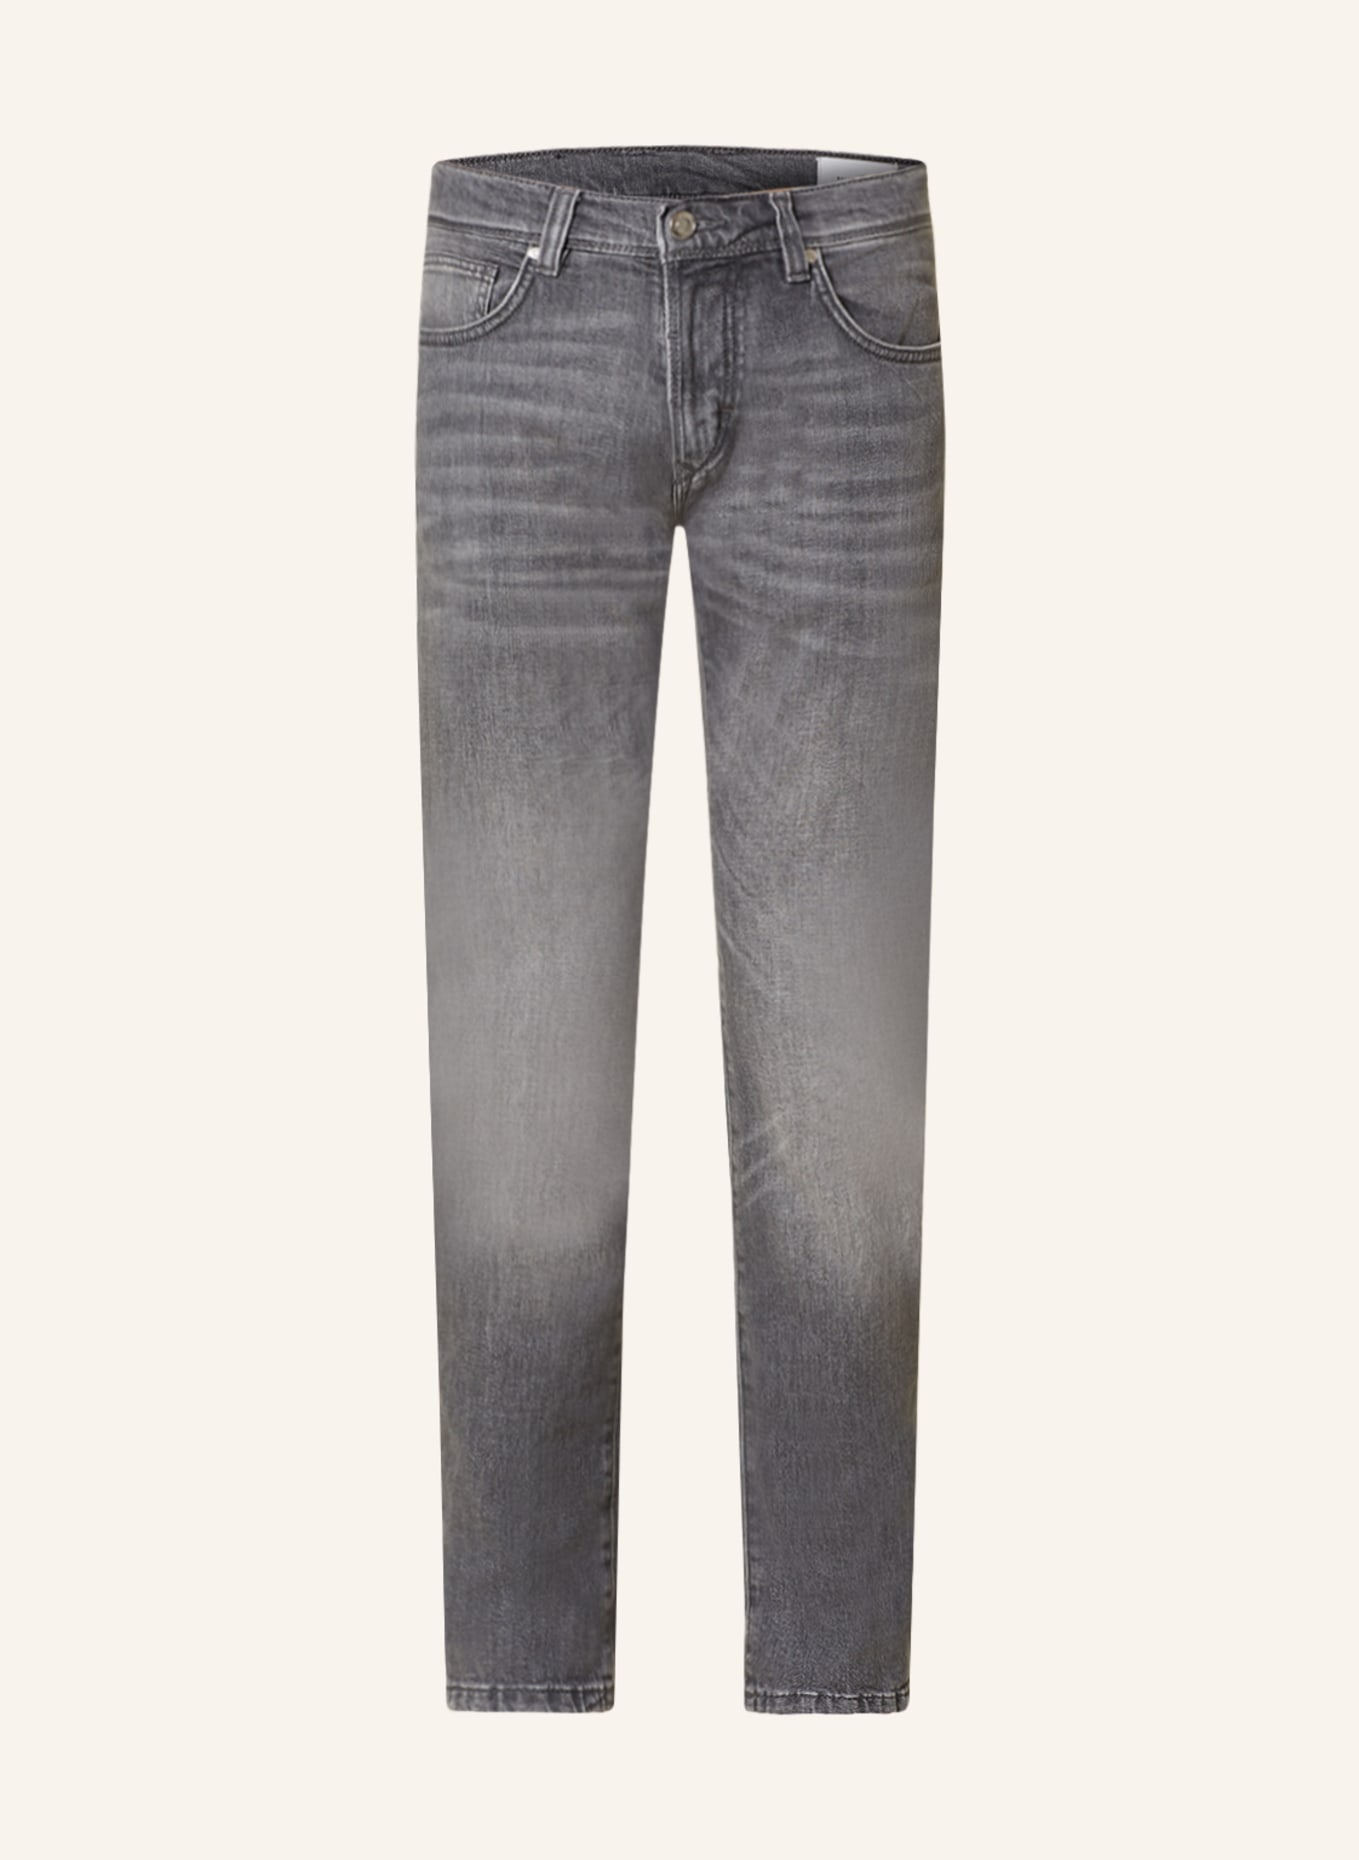 BALDESSARINI Jeans Tapered Fit, Farbe: 9834 grey used buffies (Bild 1)